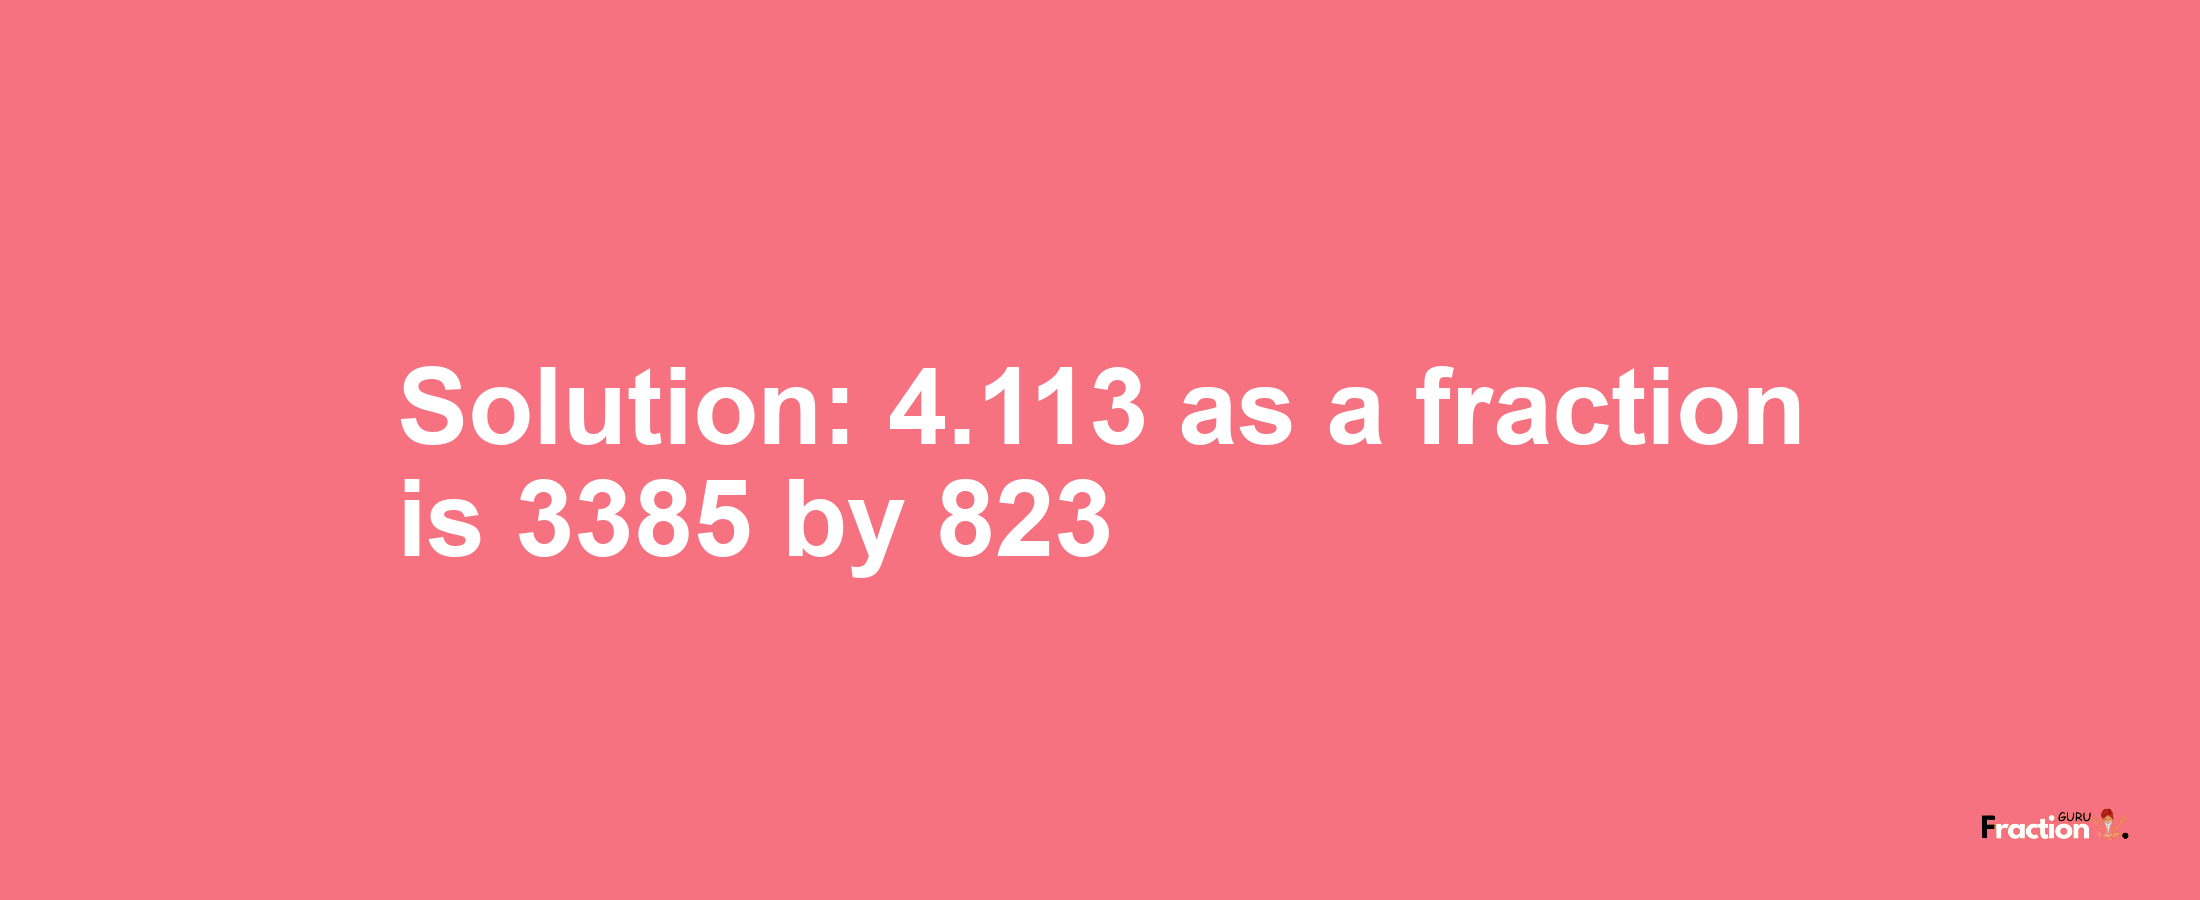 Solution:4.113 as a fraction is 3385/823